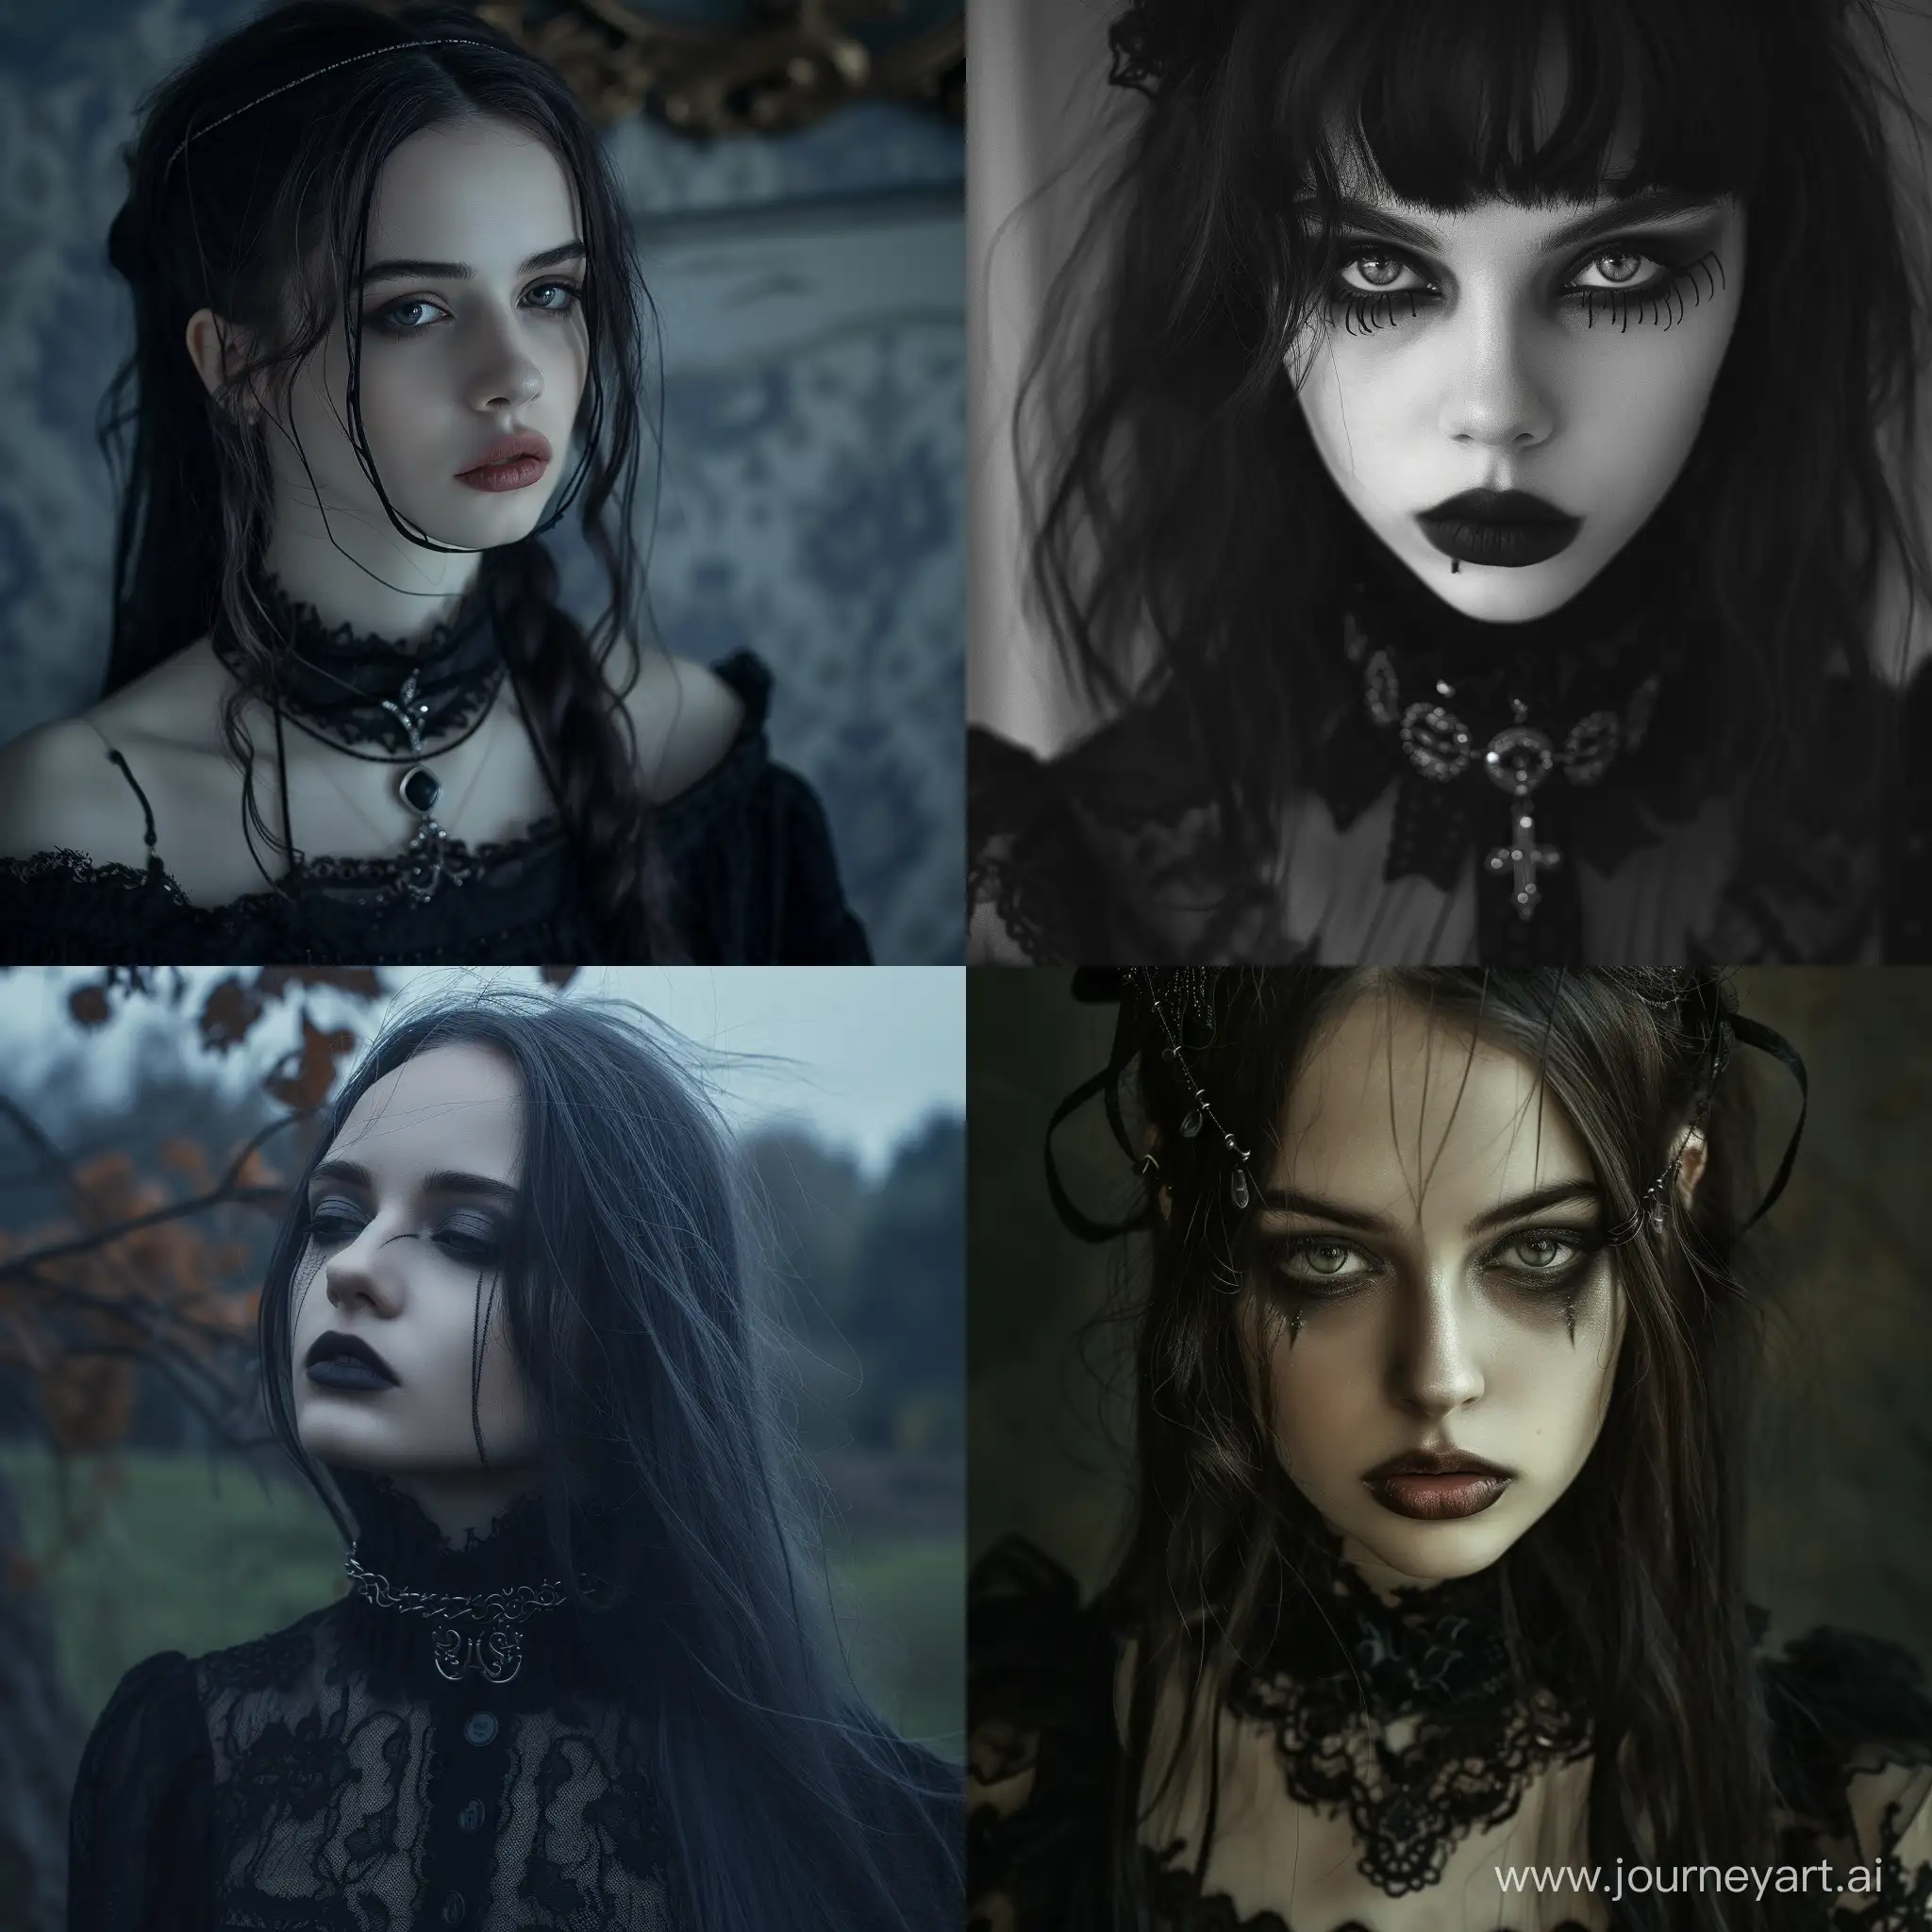 Realistic-Photography-of-Gothic-Style-Girl-in-4K-Resolution